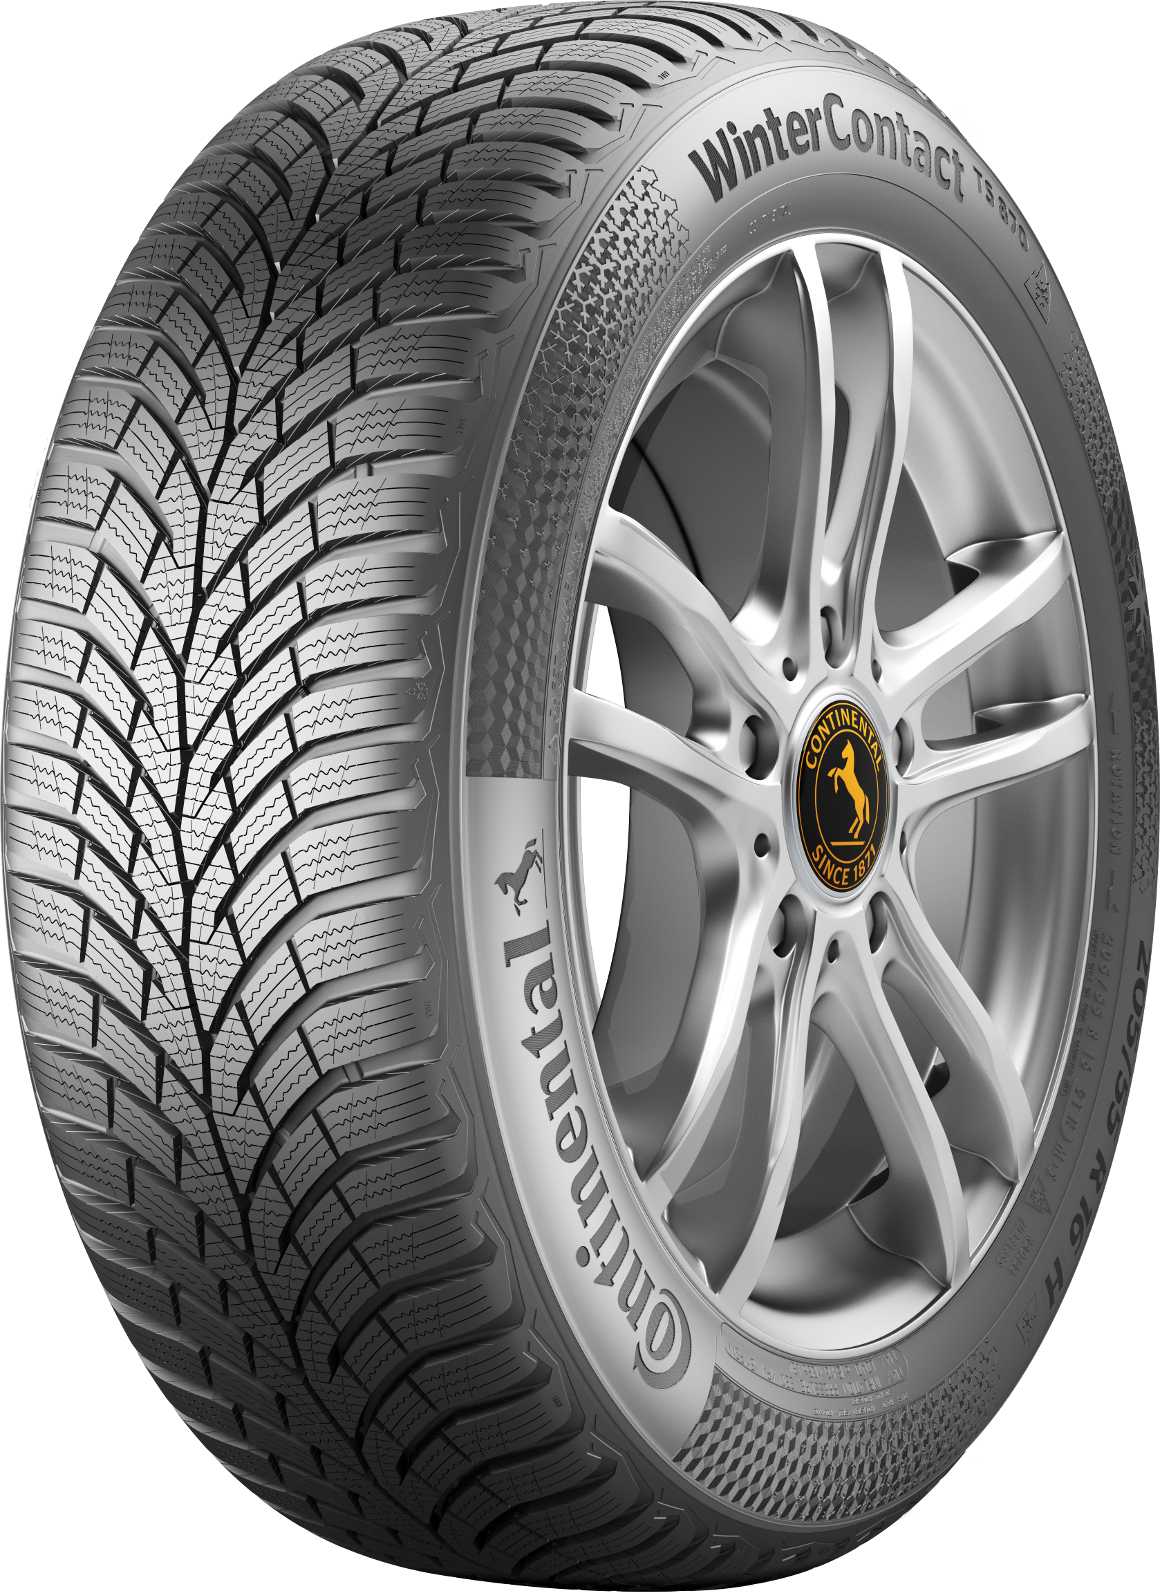    Continental Winter Contact TS870 225/50 R17 